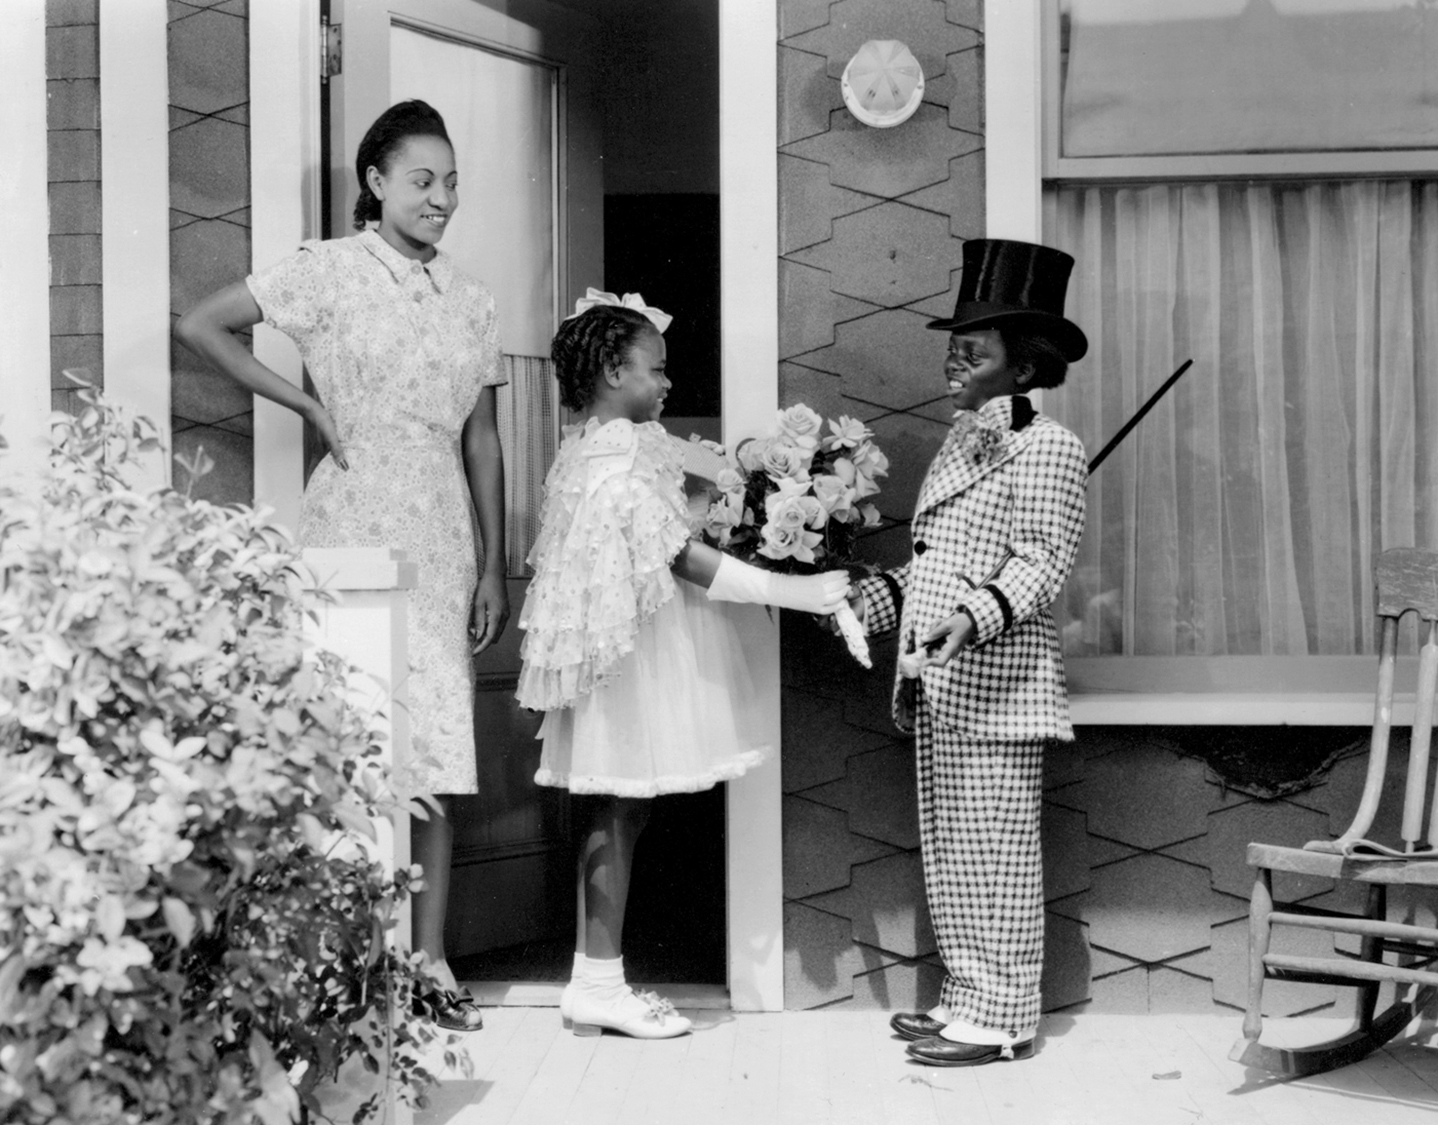 Thomas as the Buckwheat character dressed in a suit with cane shaking a young girl's hand on the porch while a woman smiles in the background